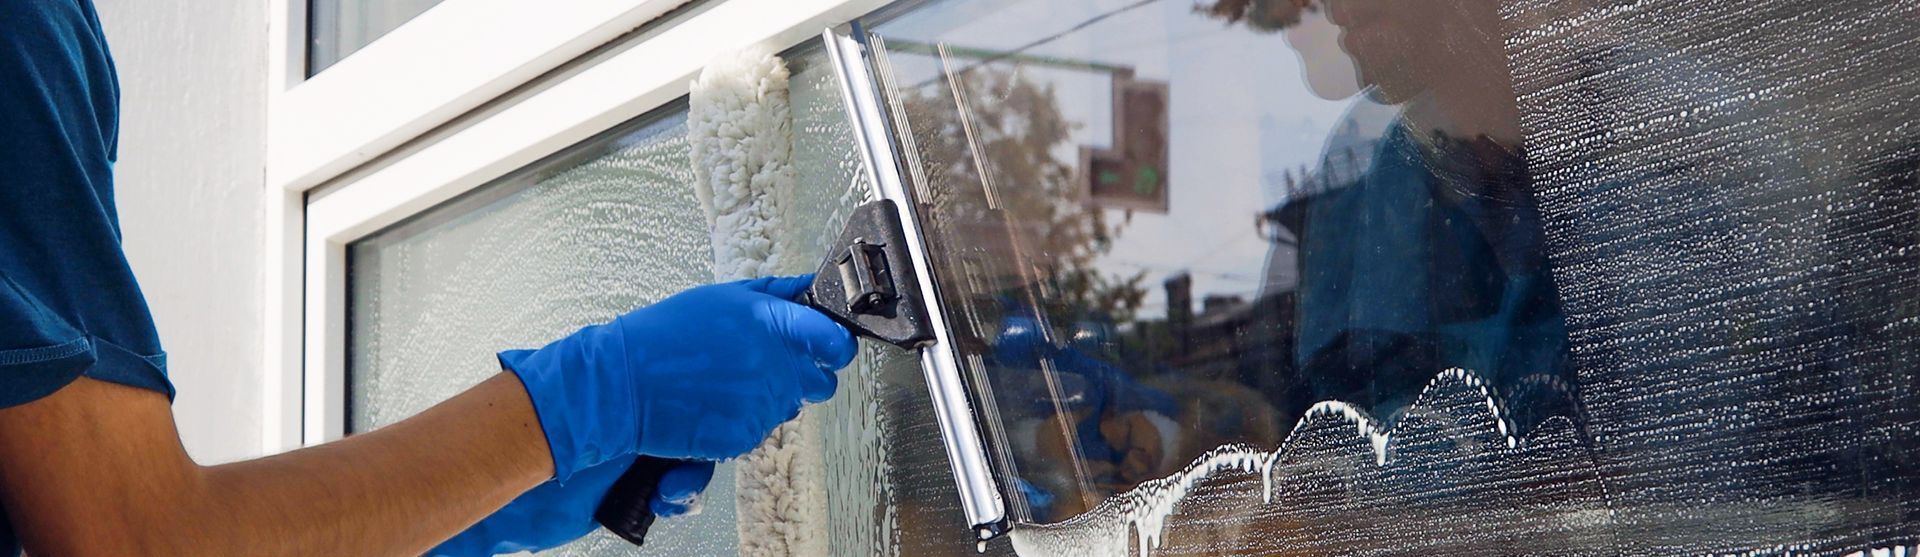 a man is cleaning a window with a squeegee